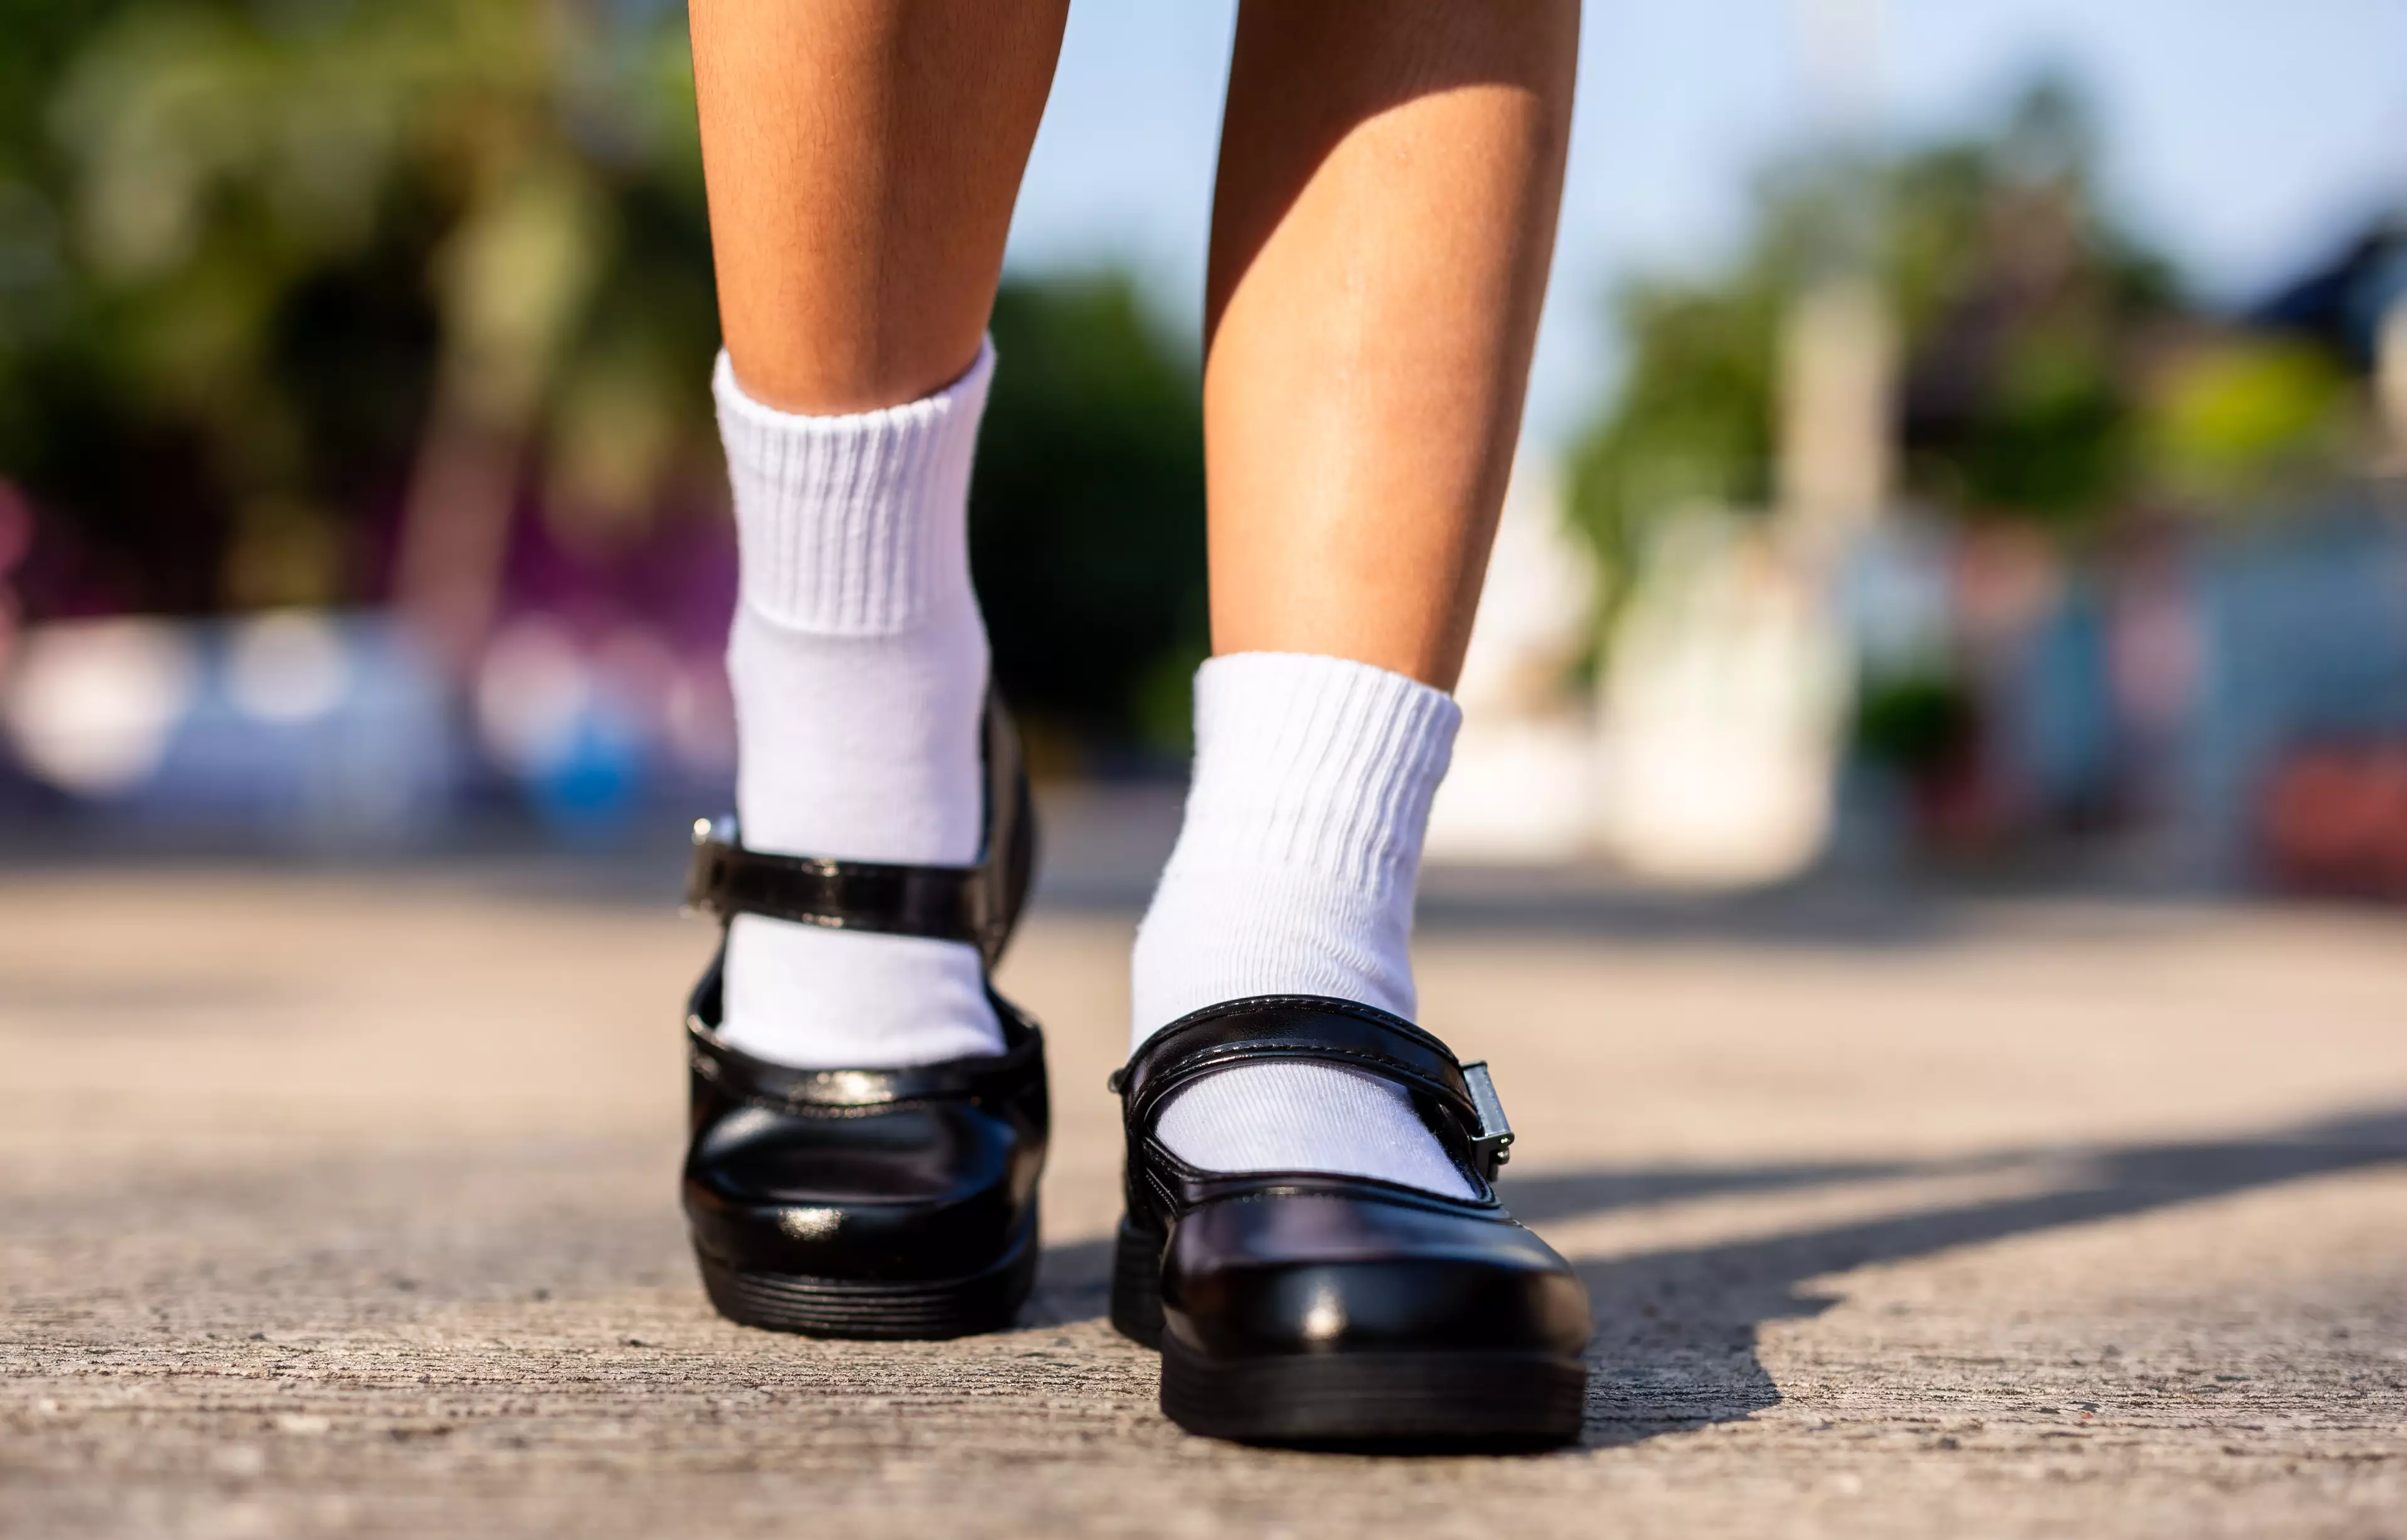 The deal applies to kids school shoes (